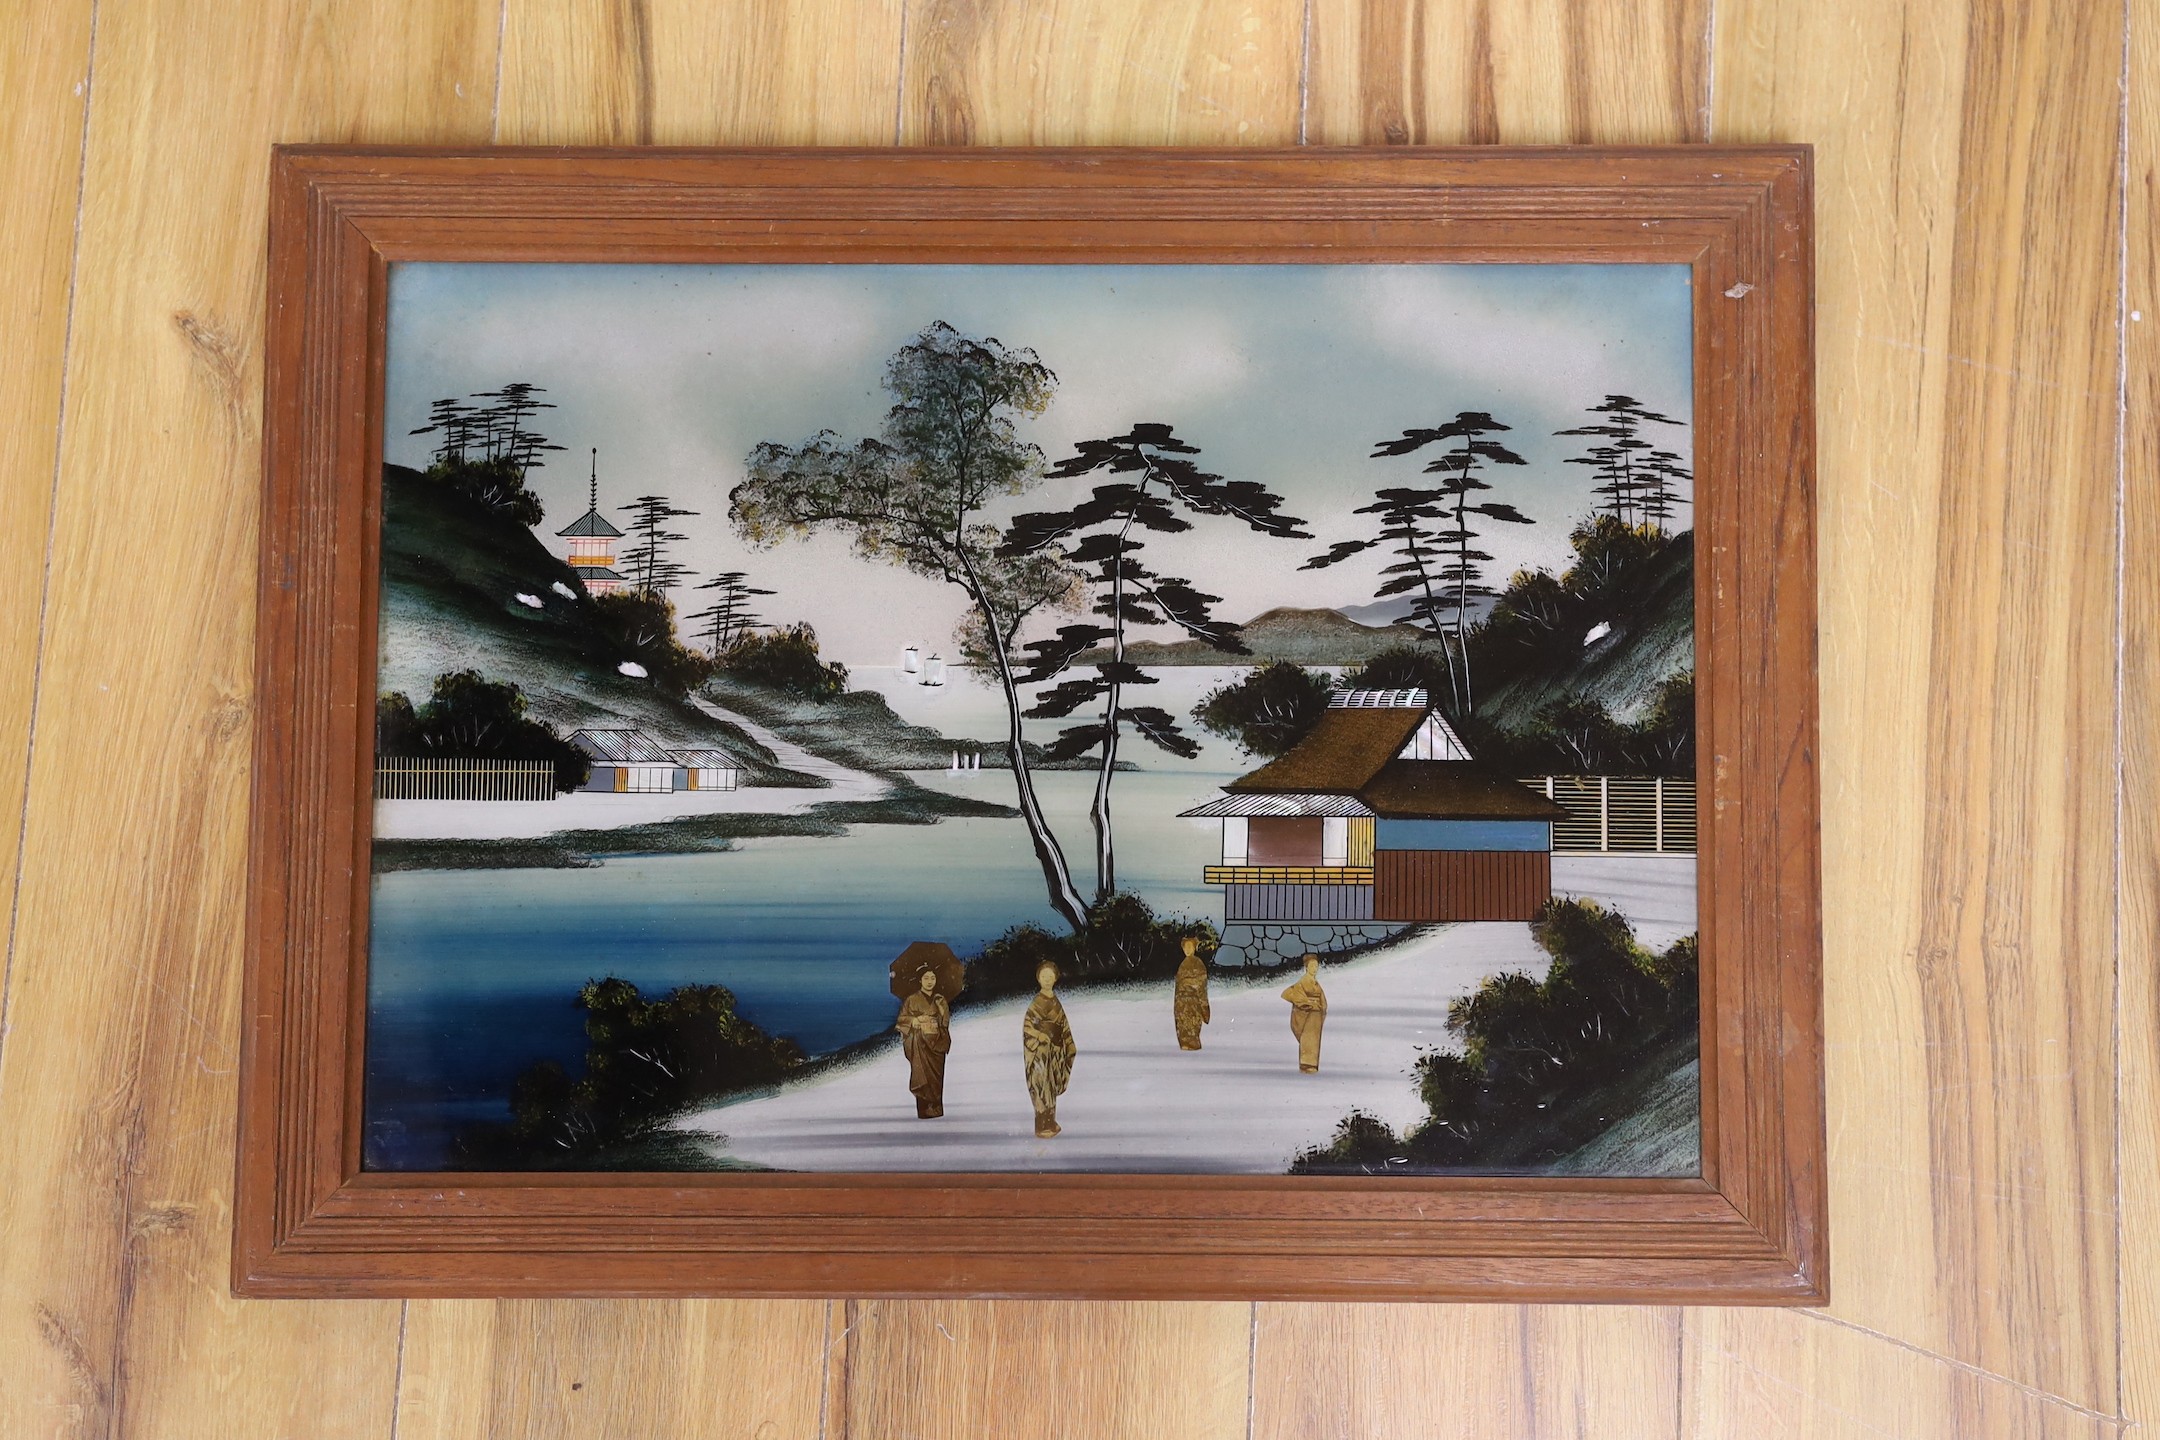 A Japanese reverse painting on glass, 49.5.wide x 34.5 high.